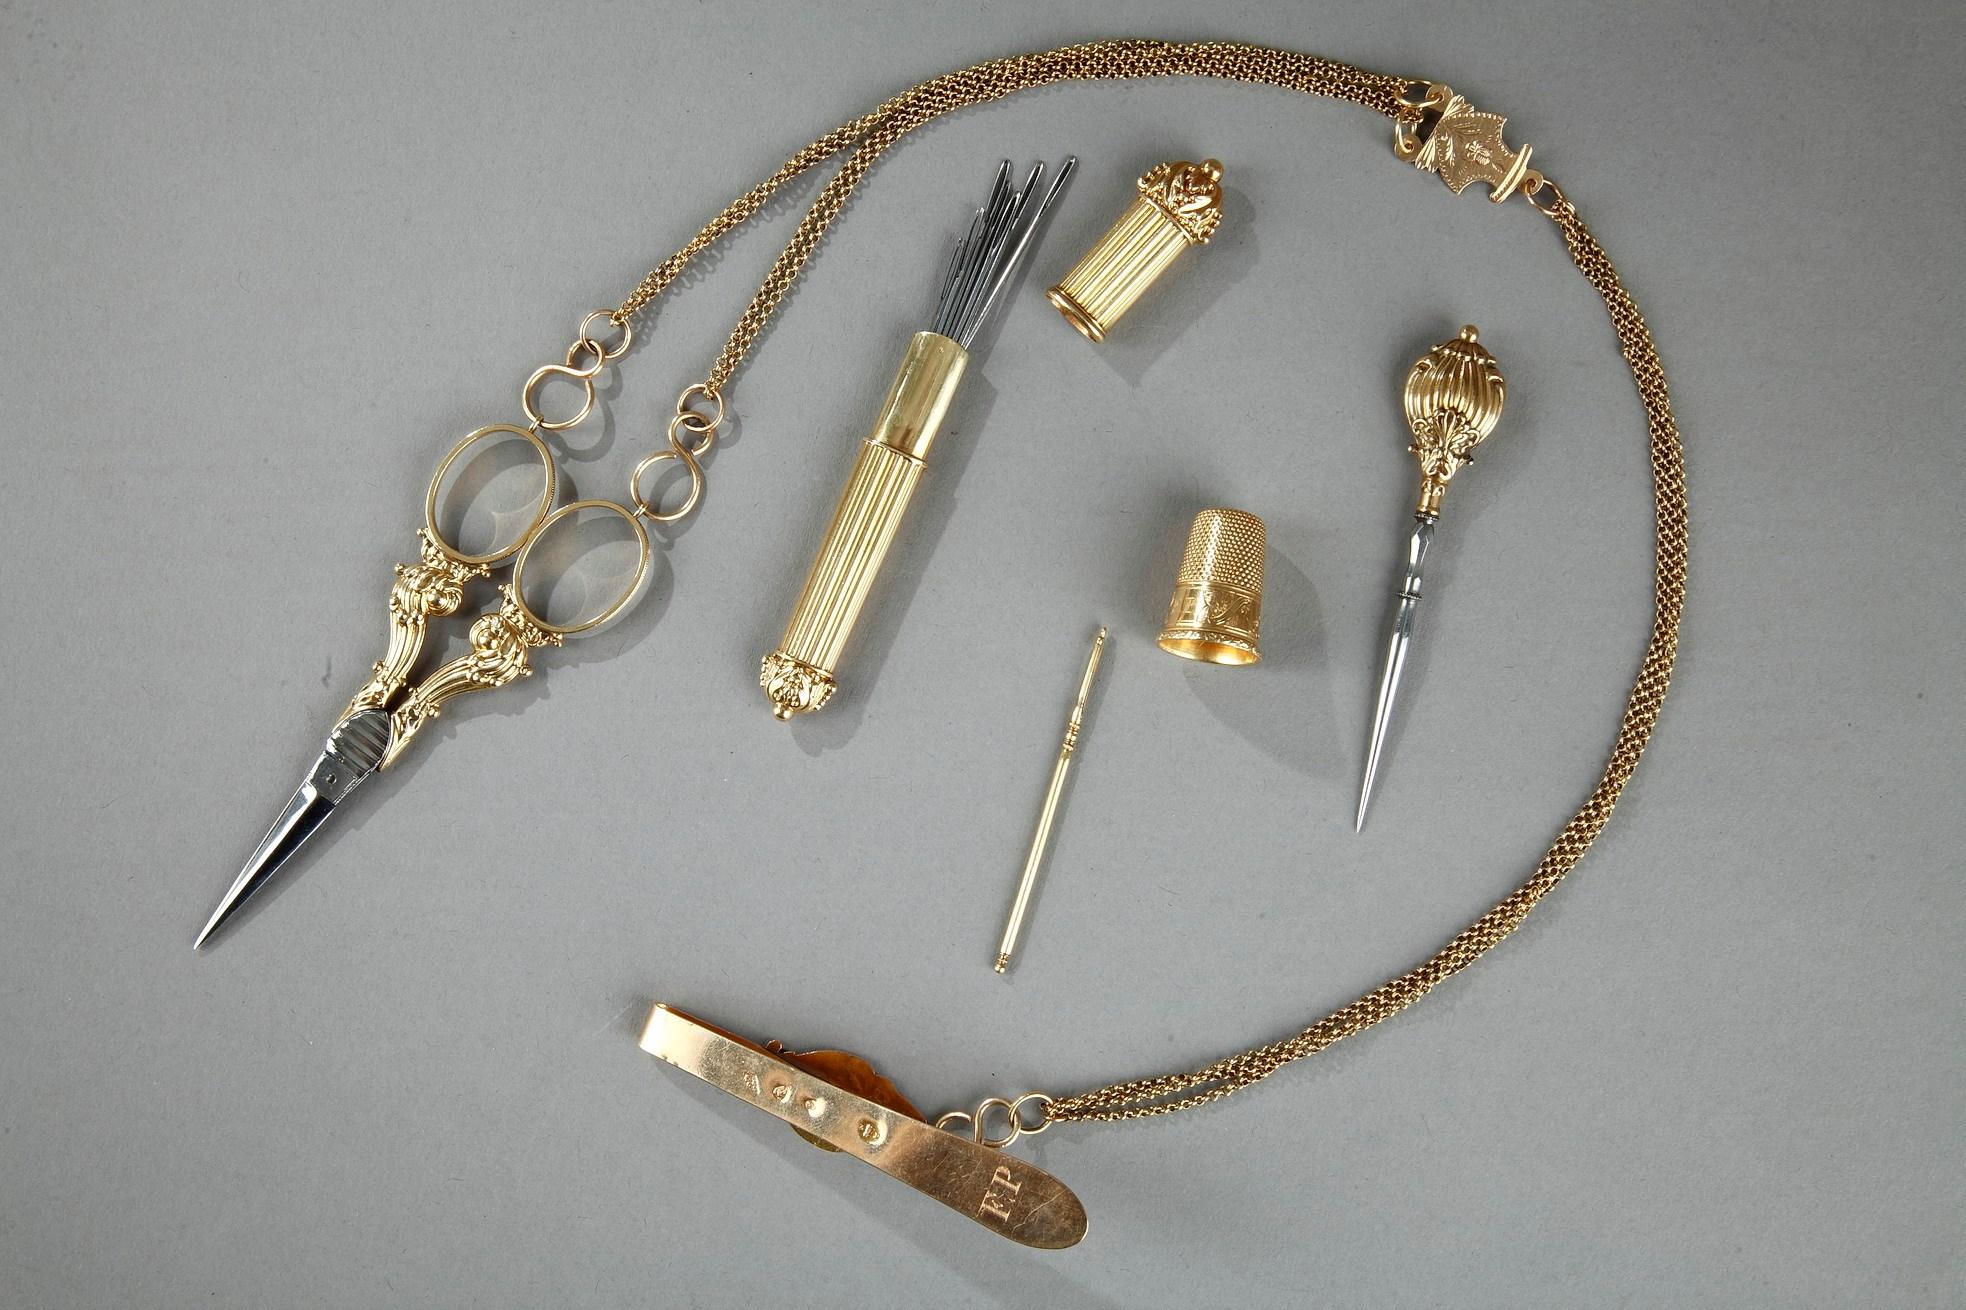 French Gold Sewing Box with Chatelaine, Early 19th Century